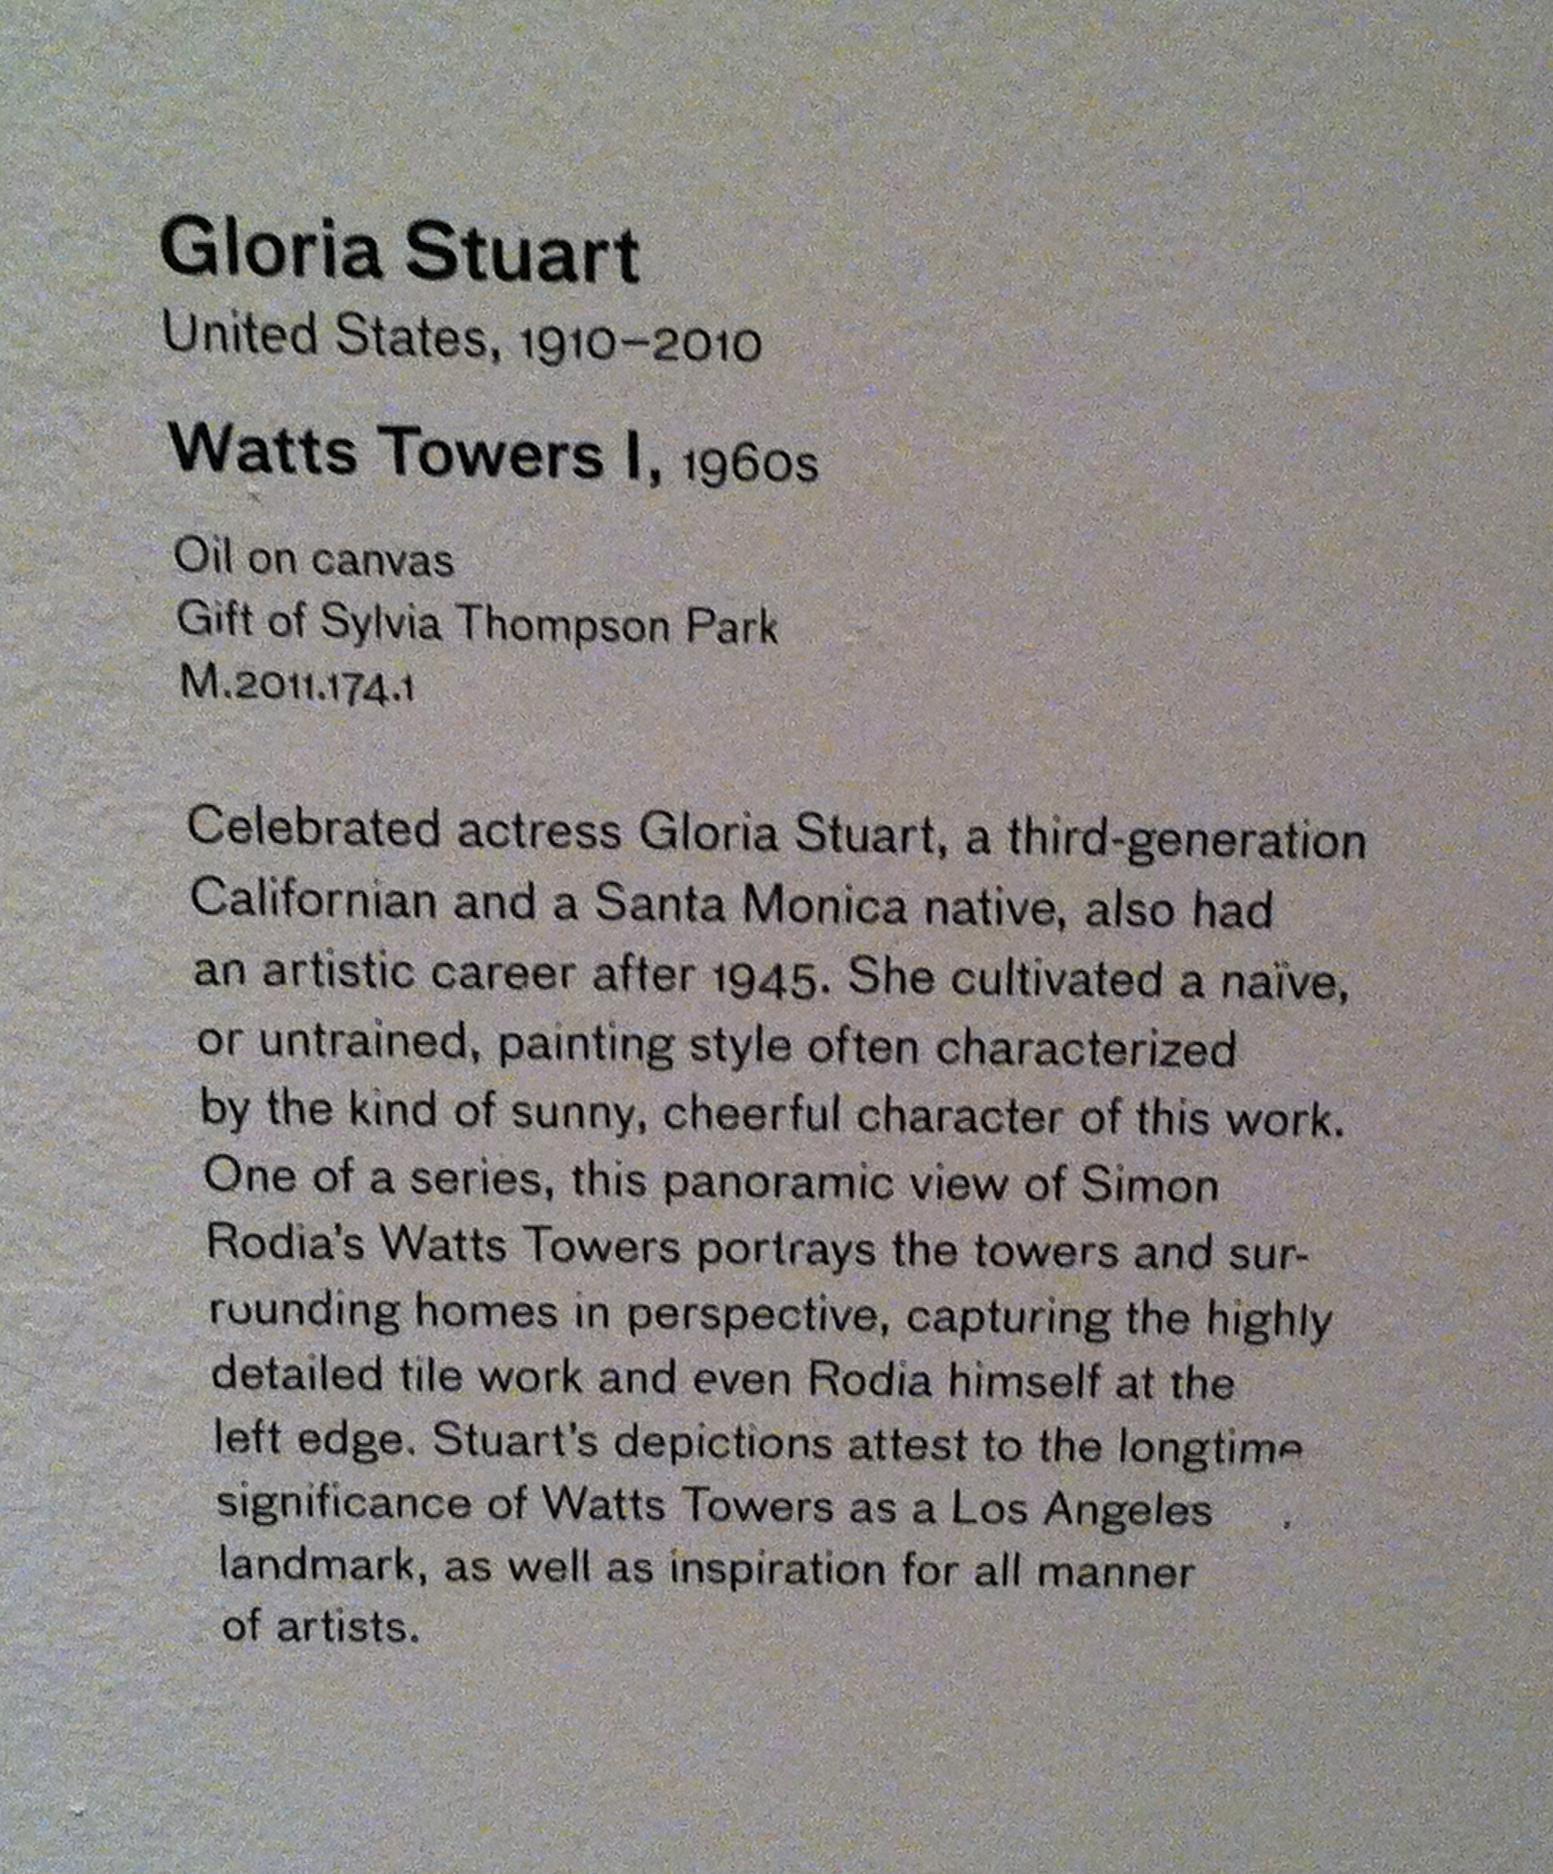 GLORIA STUART (1910 – 2010)
     
WATTS TOWERS, 1971 
Oil on canvas, signed lower right, 24” x 50 ½”. Gloria Stuart, an Academy Award nominated actress was also a painter, illustrator and printmaker. She most recently portrayed Rose in the